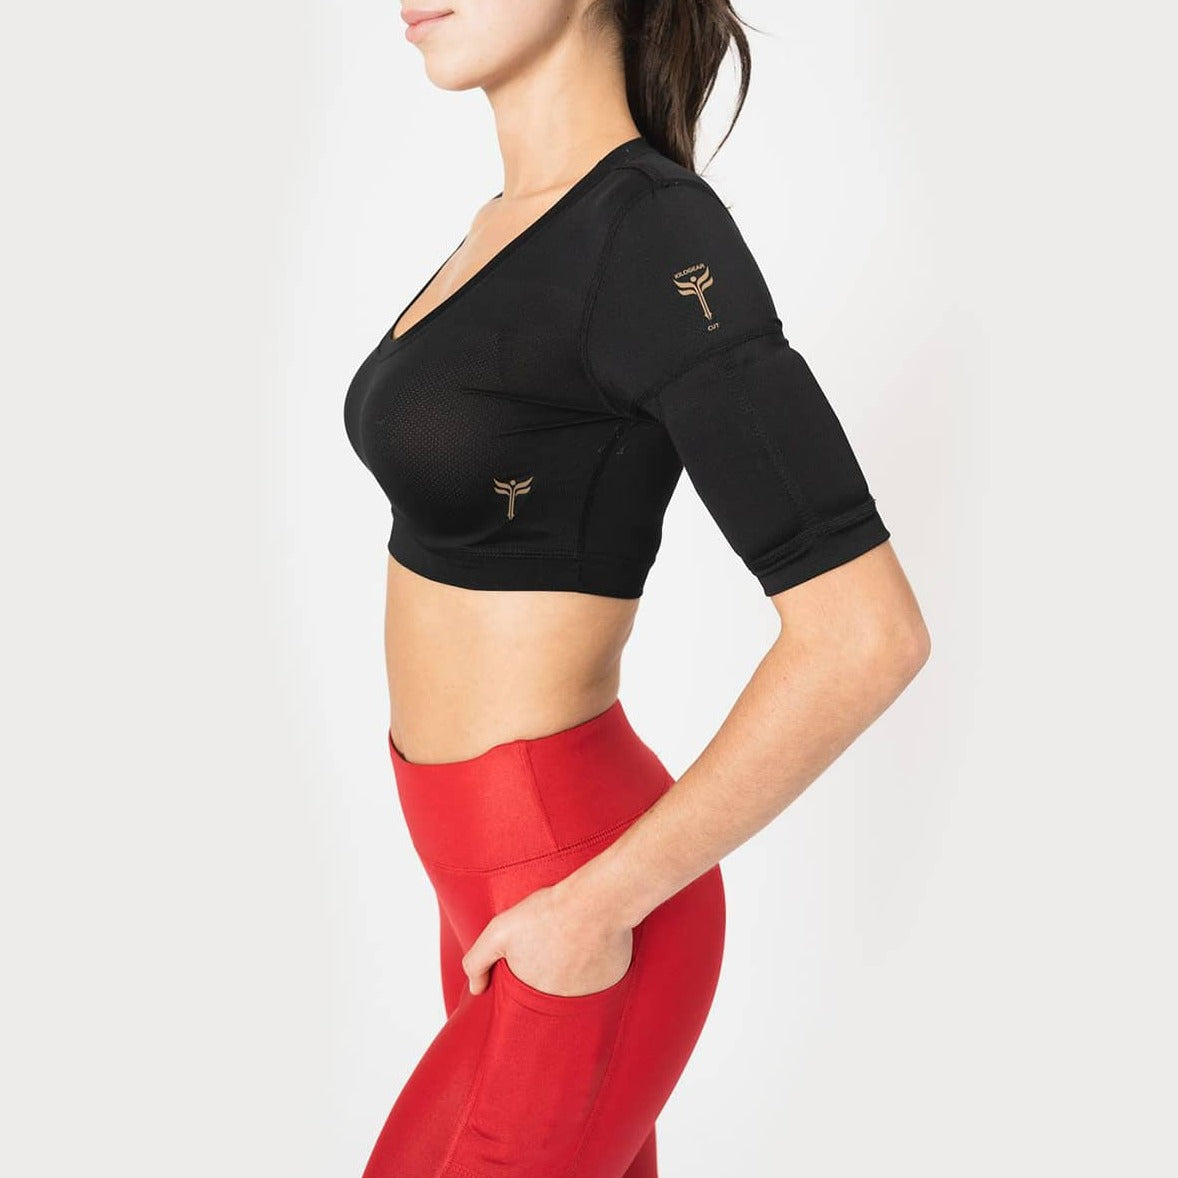 Showing black crop top with scoop neck. Two weight pockets on  the biceps of the arm.